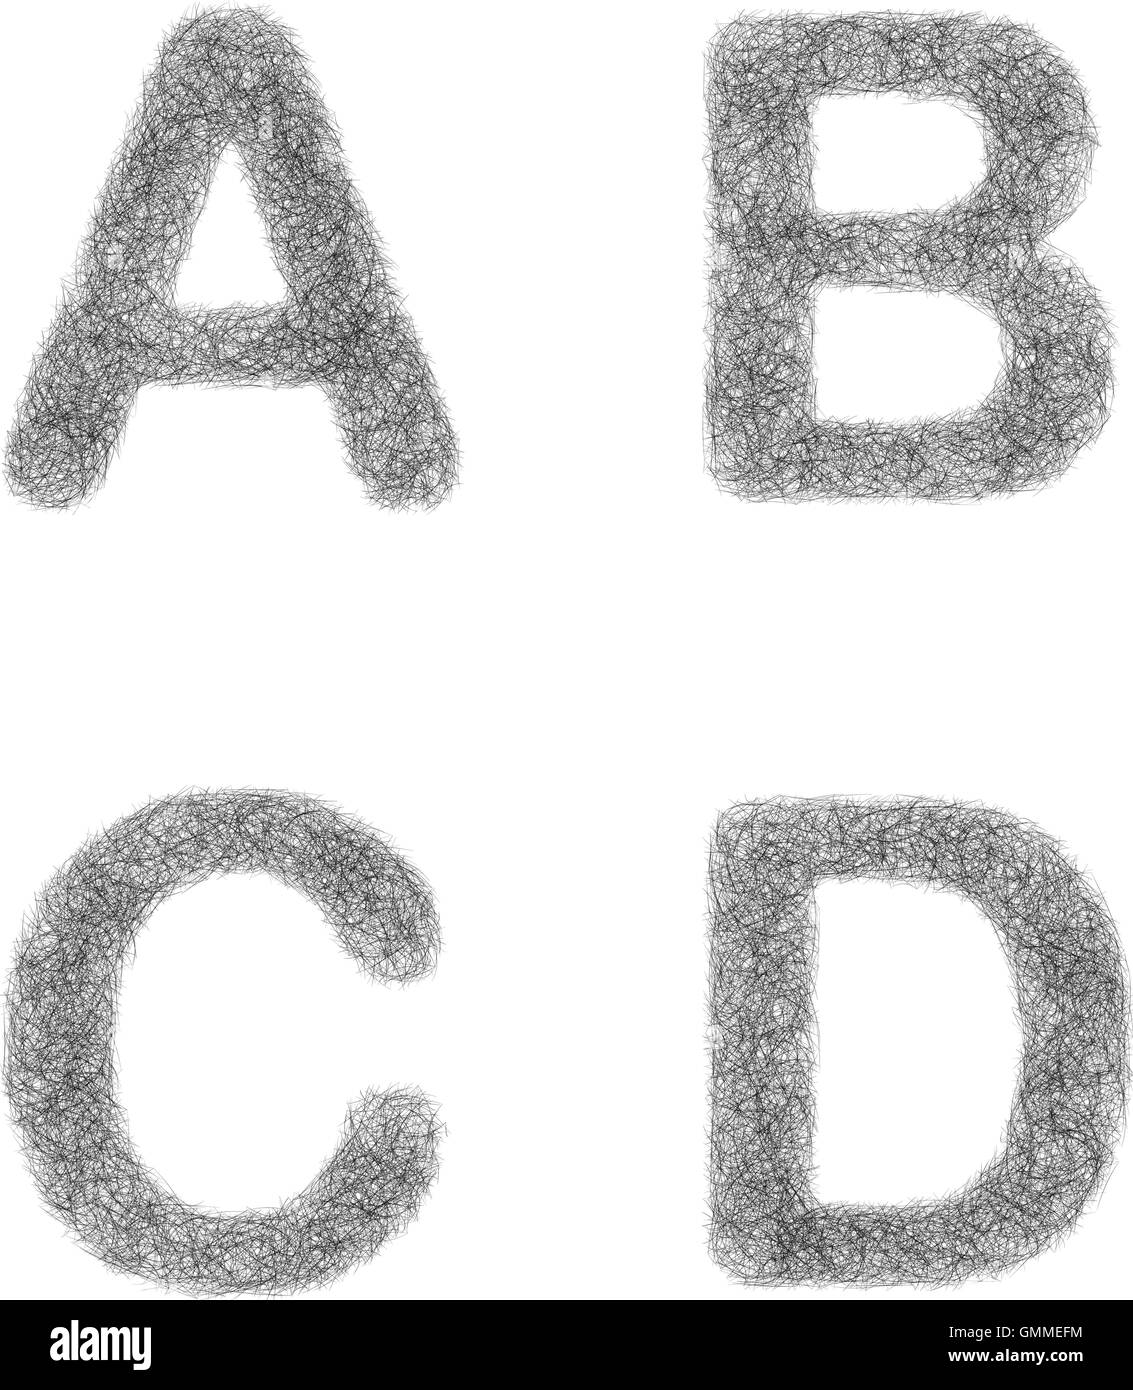 Letter a b c d Black and White Stock Photos & Images - Alamy